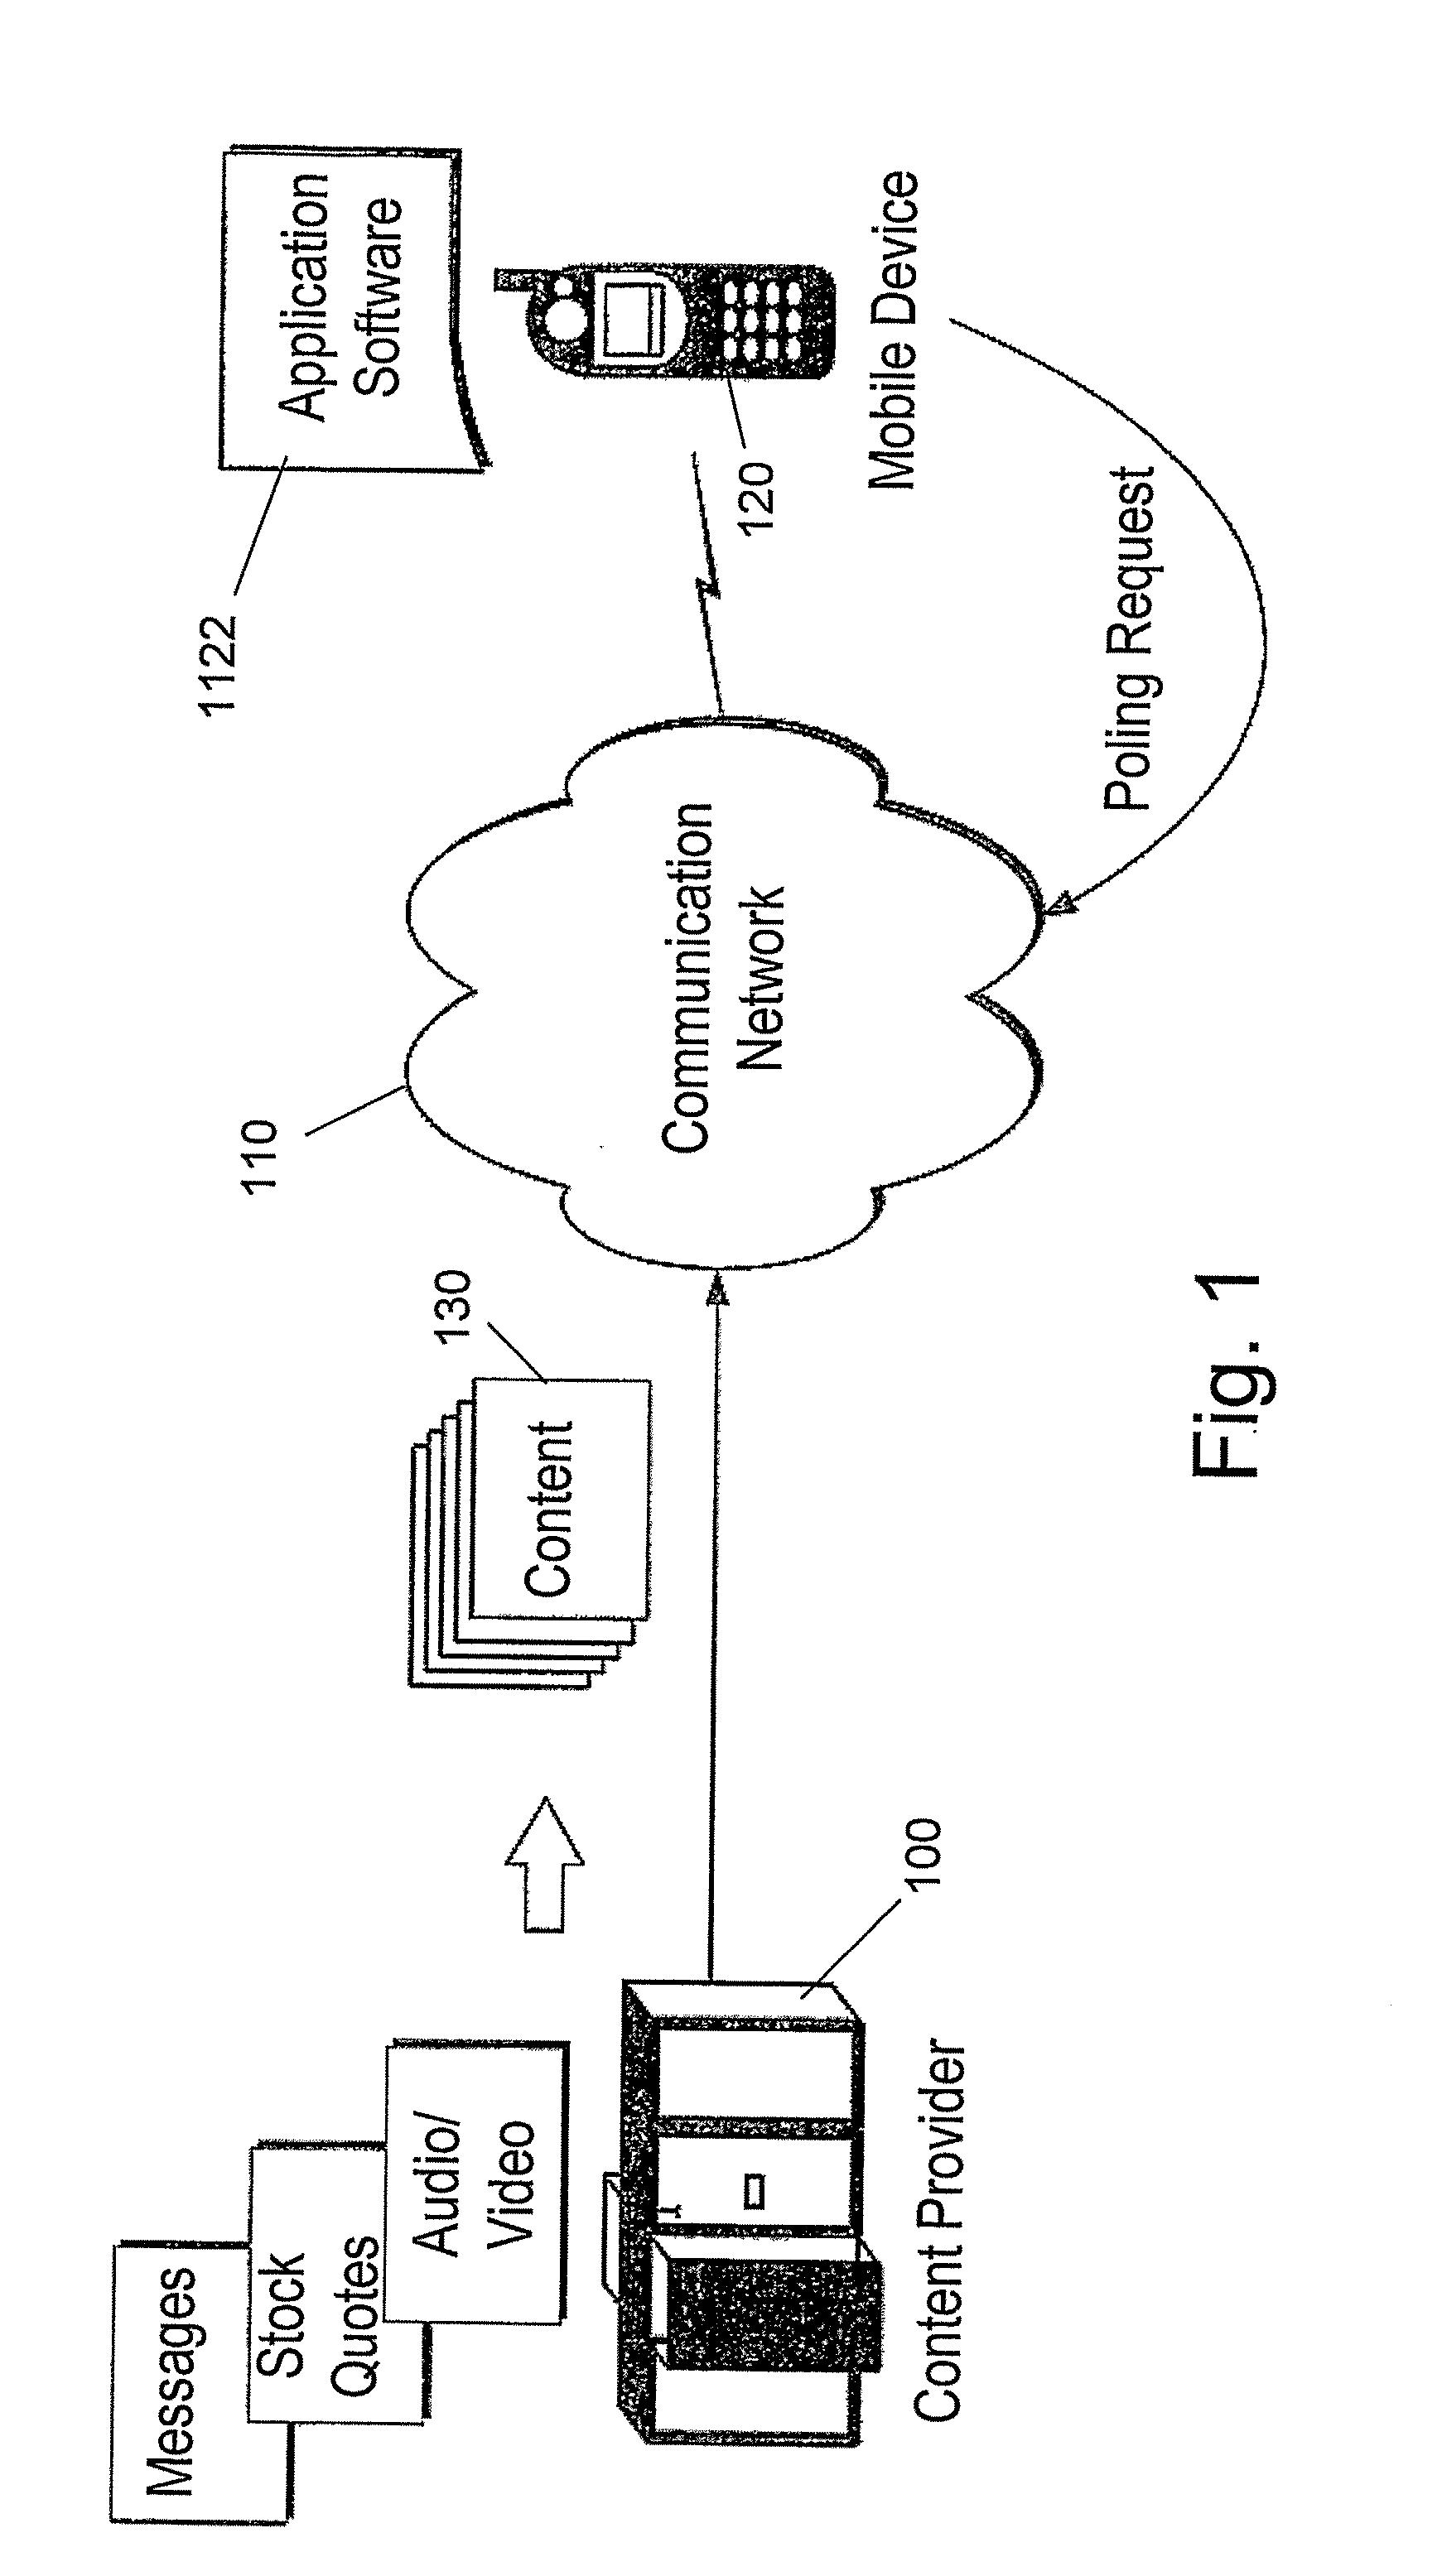 Efficient server polling system and method